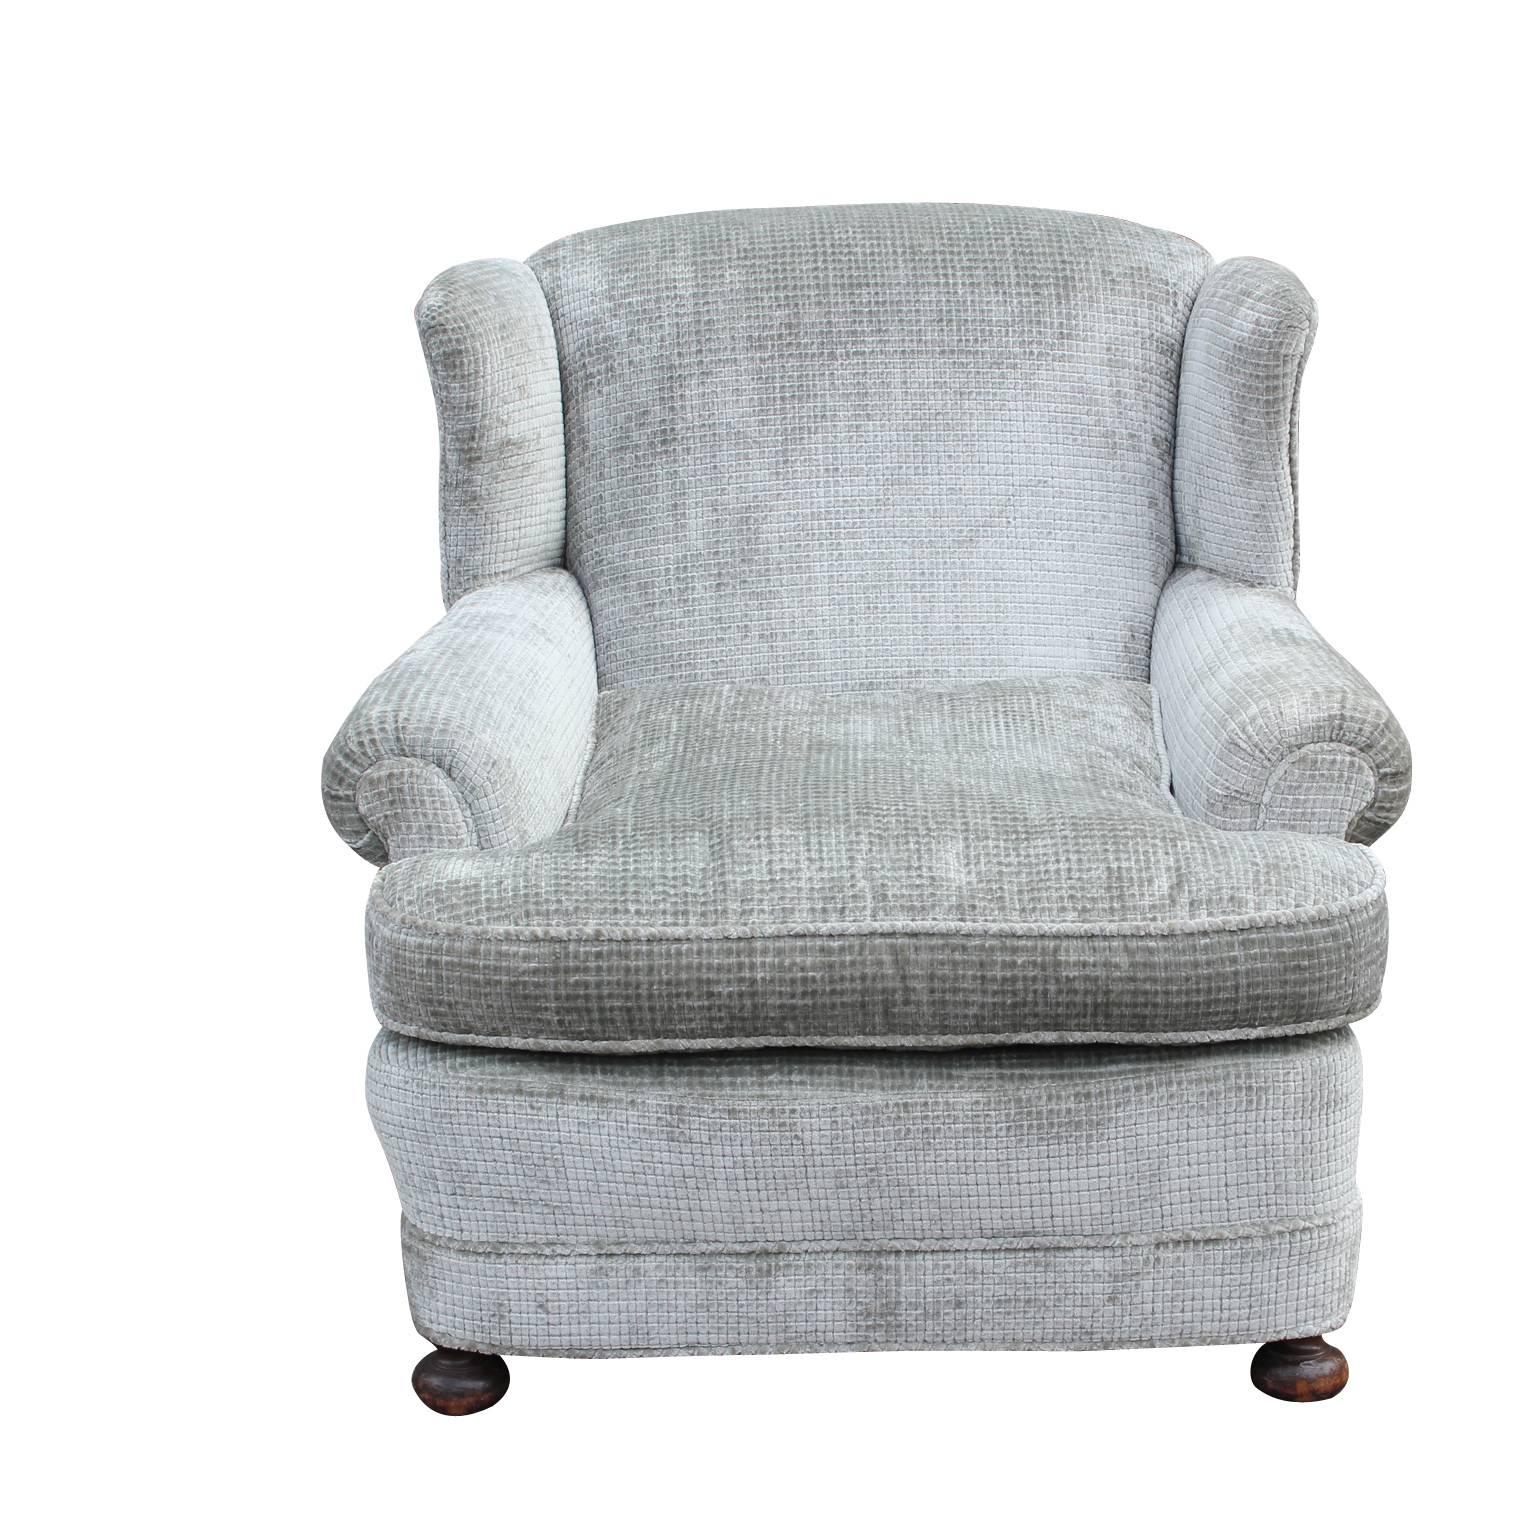 Ultra comfortable rolled arm wingback lounge chair with a slight recline restored in a square pattern soft grey velvet with bun feet.